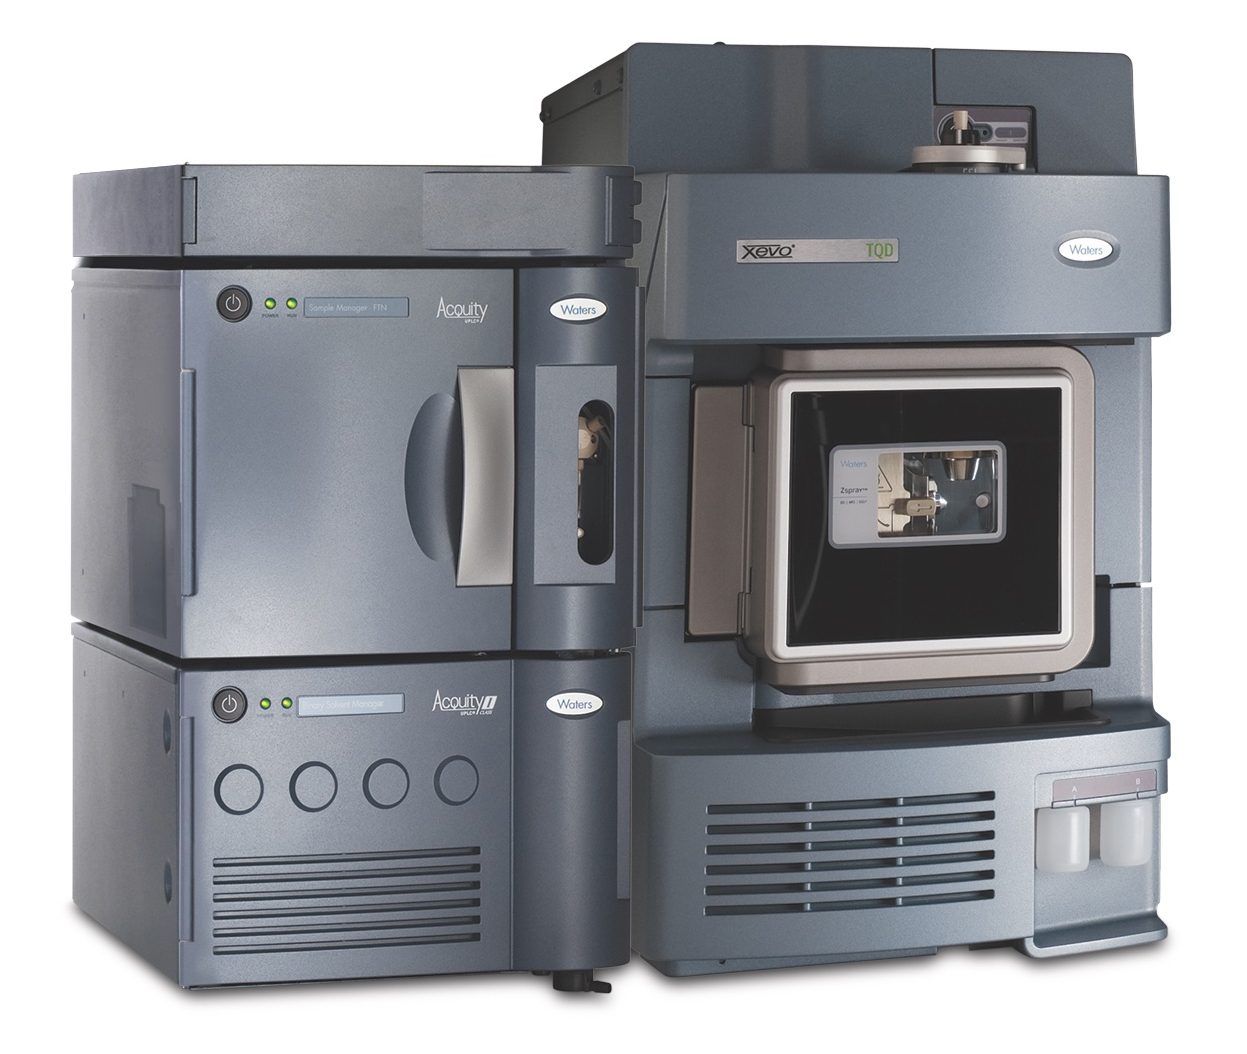 The Waters LC-MS/MS offers high sensitivity optimized workflows